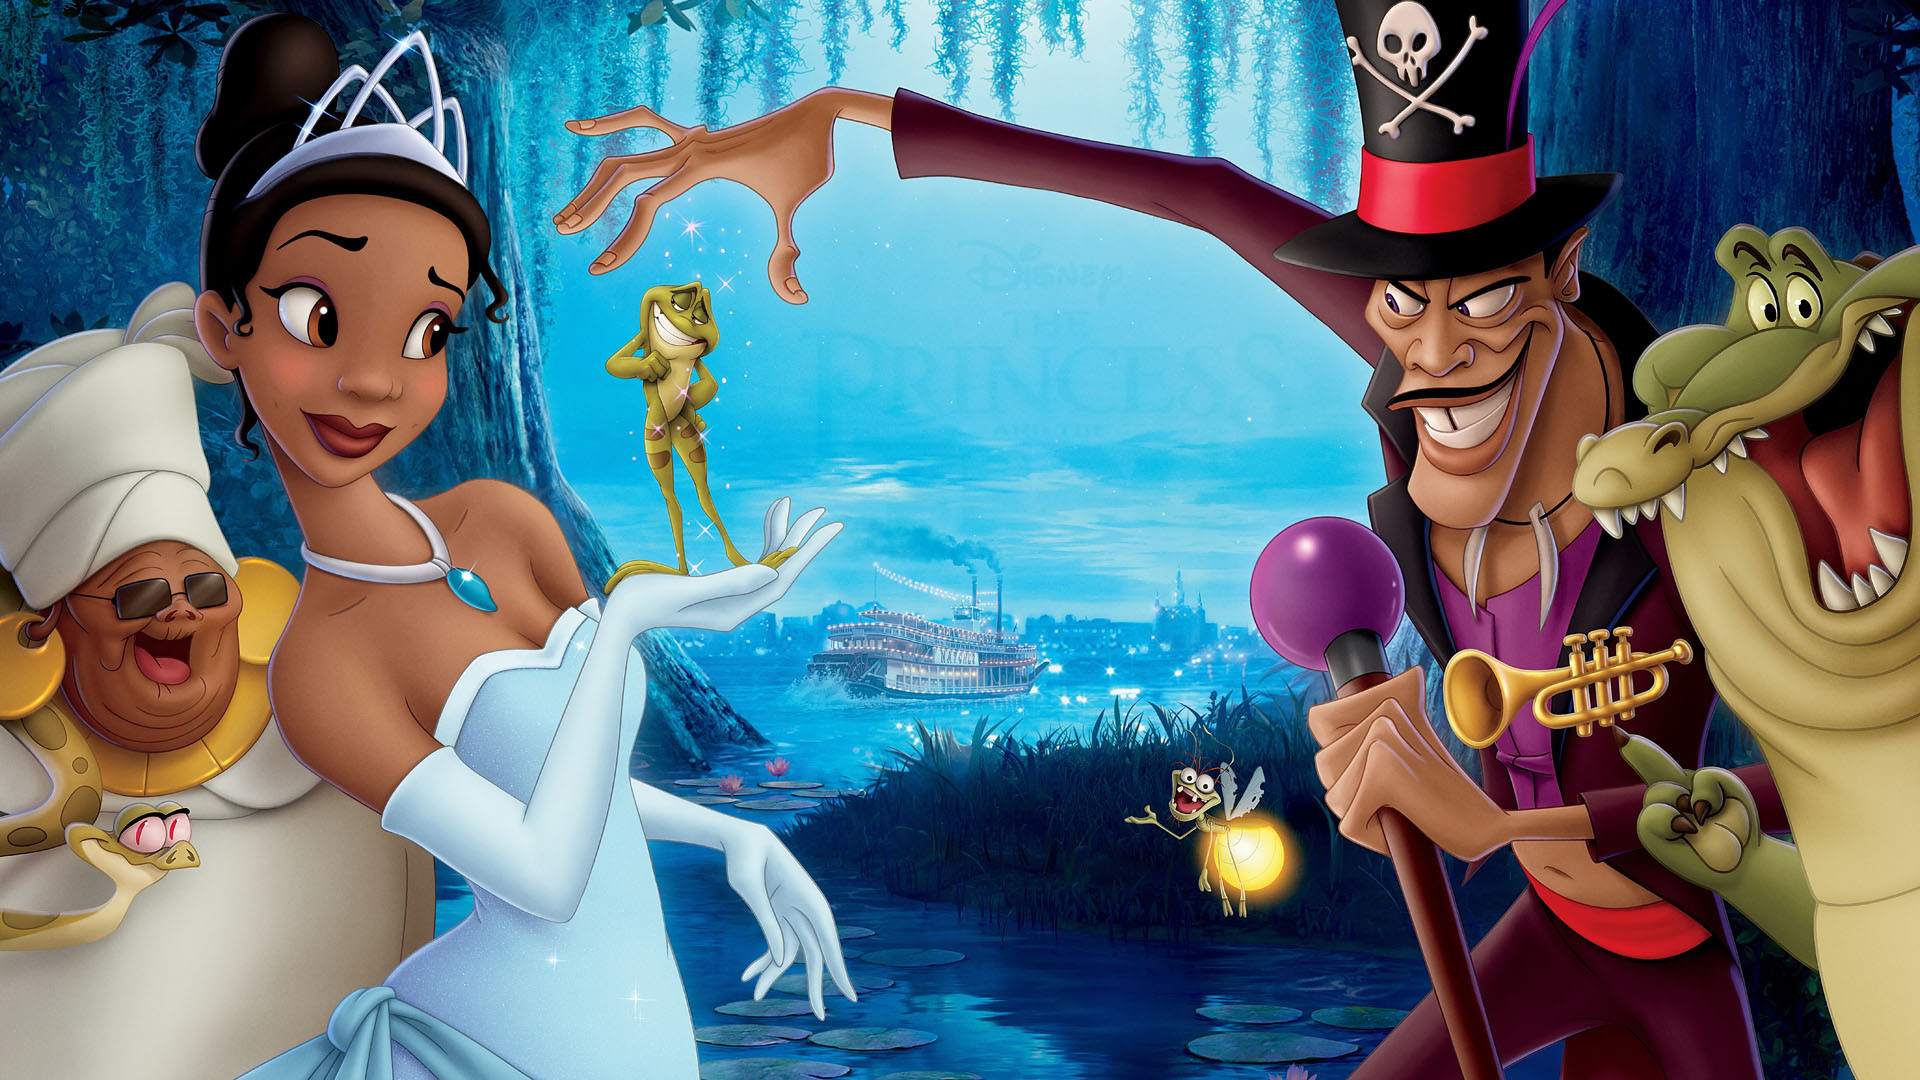 1920x1080 Awesome The Princess and the Frog Wallpaper